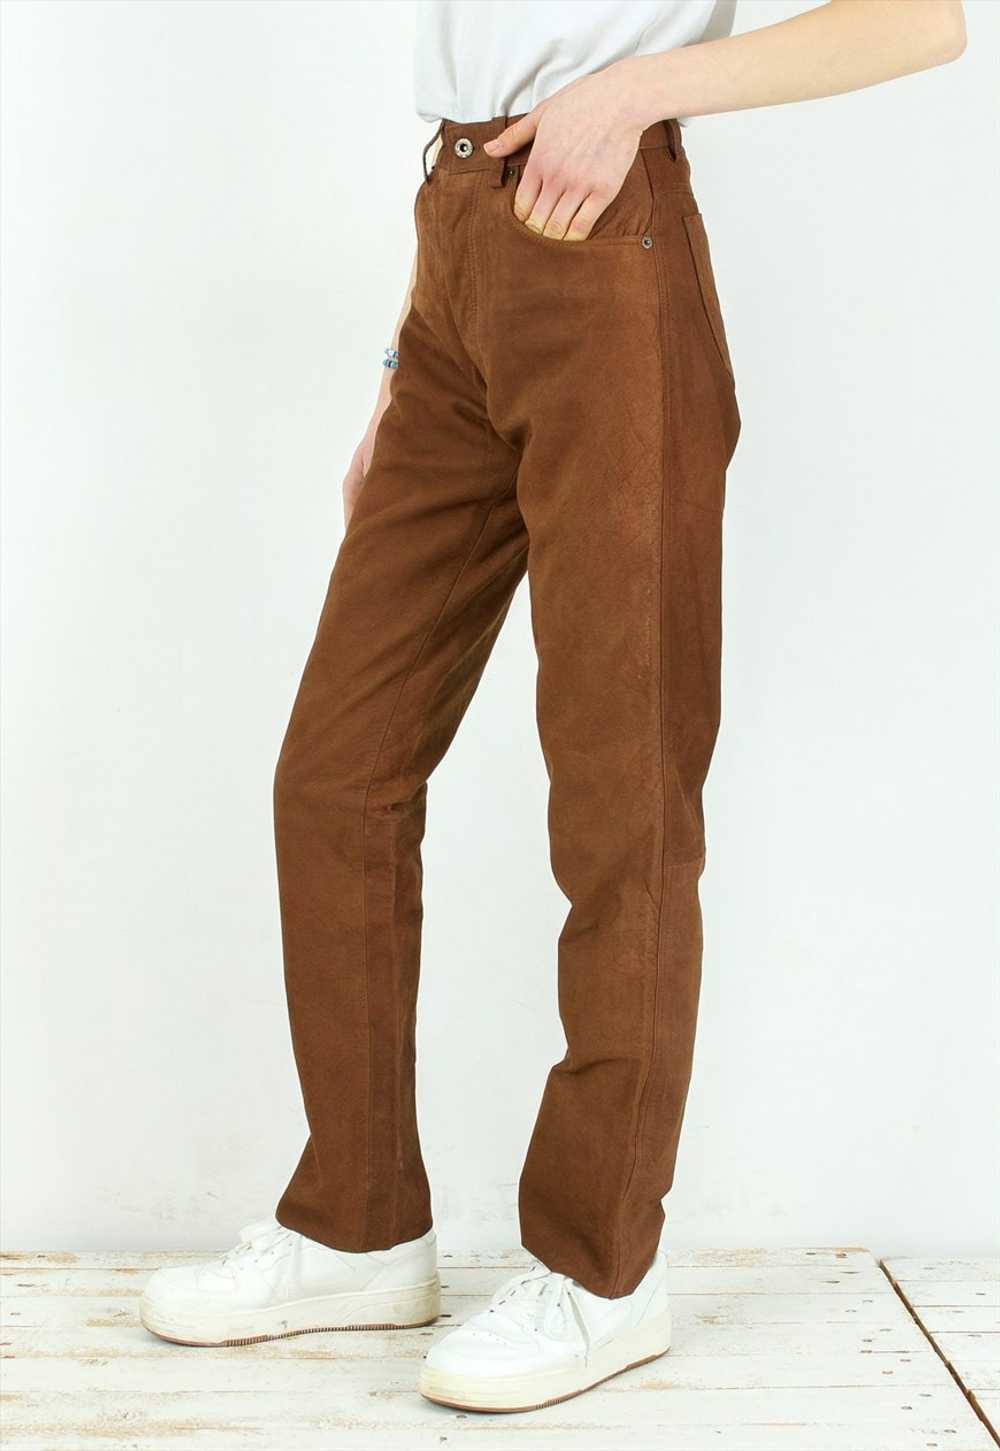 STOCKERPOINT Leather Trousers Straight Pants Cowb… - image 2